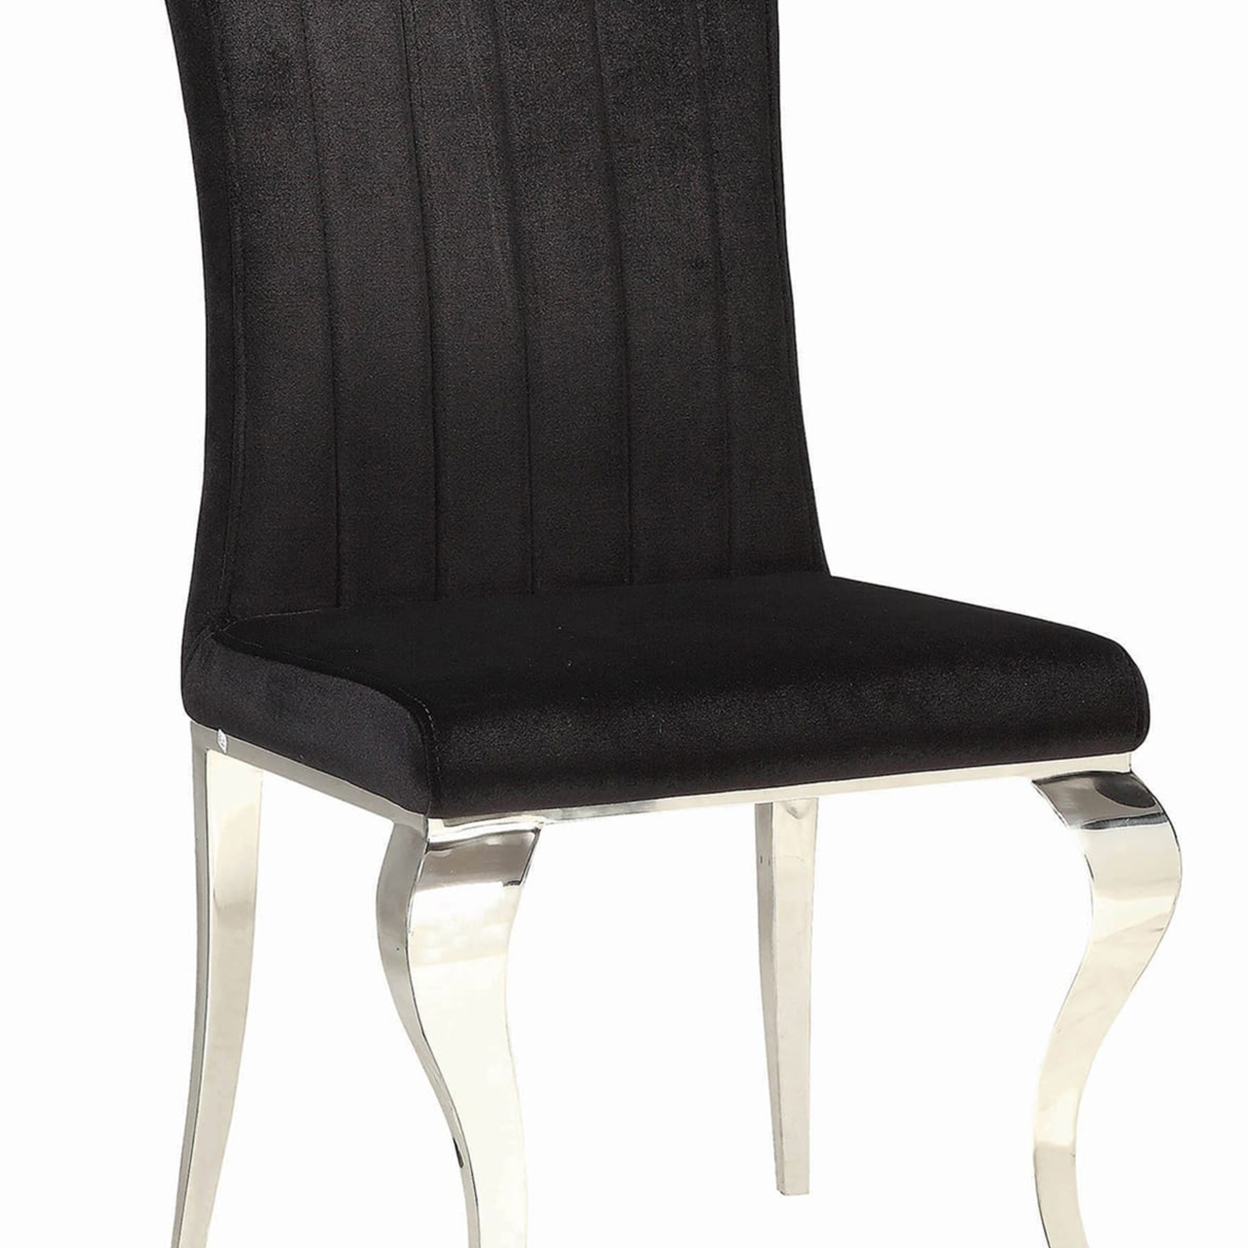 Metal Dining Chair With Cabriole Front Legs, Set Of 4, Black And Chrome- Saltoro Sherpi